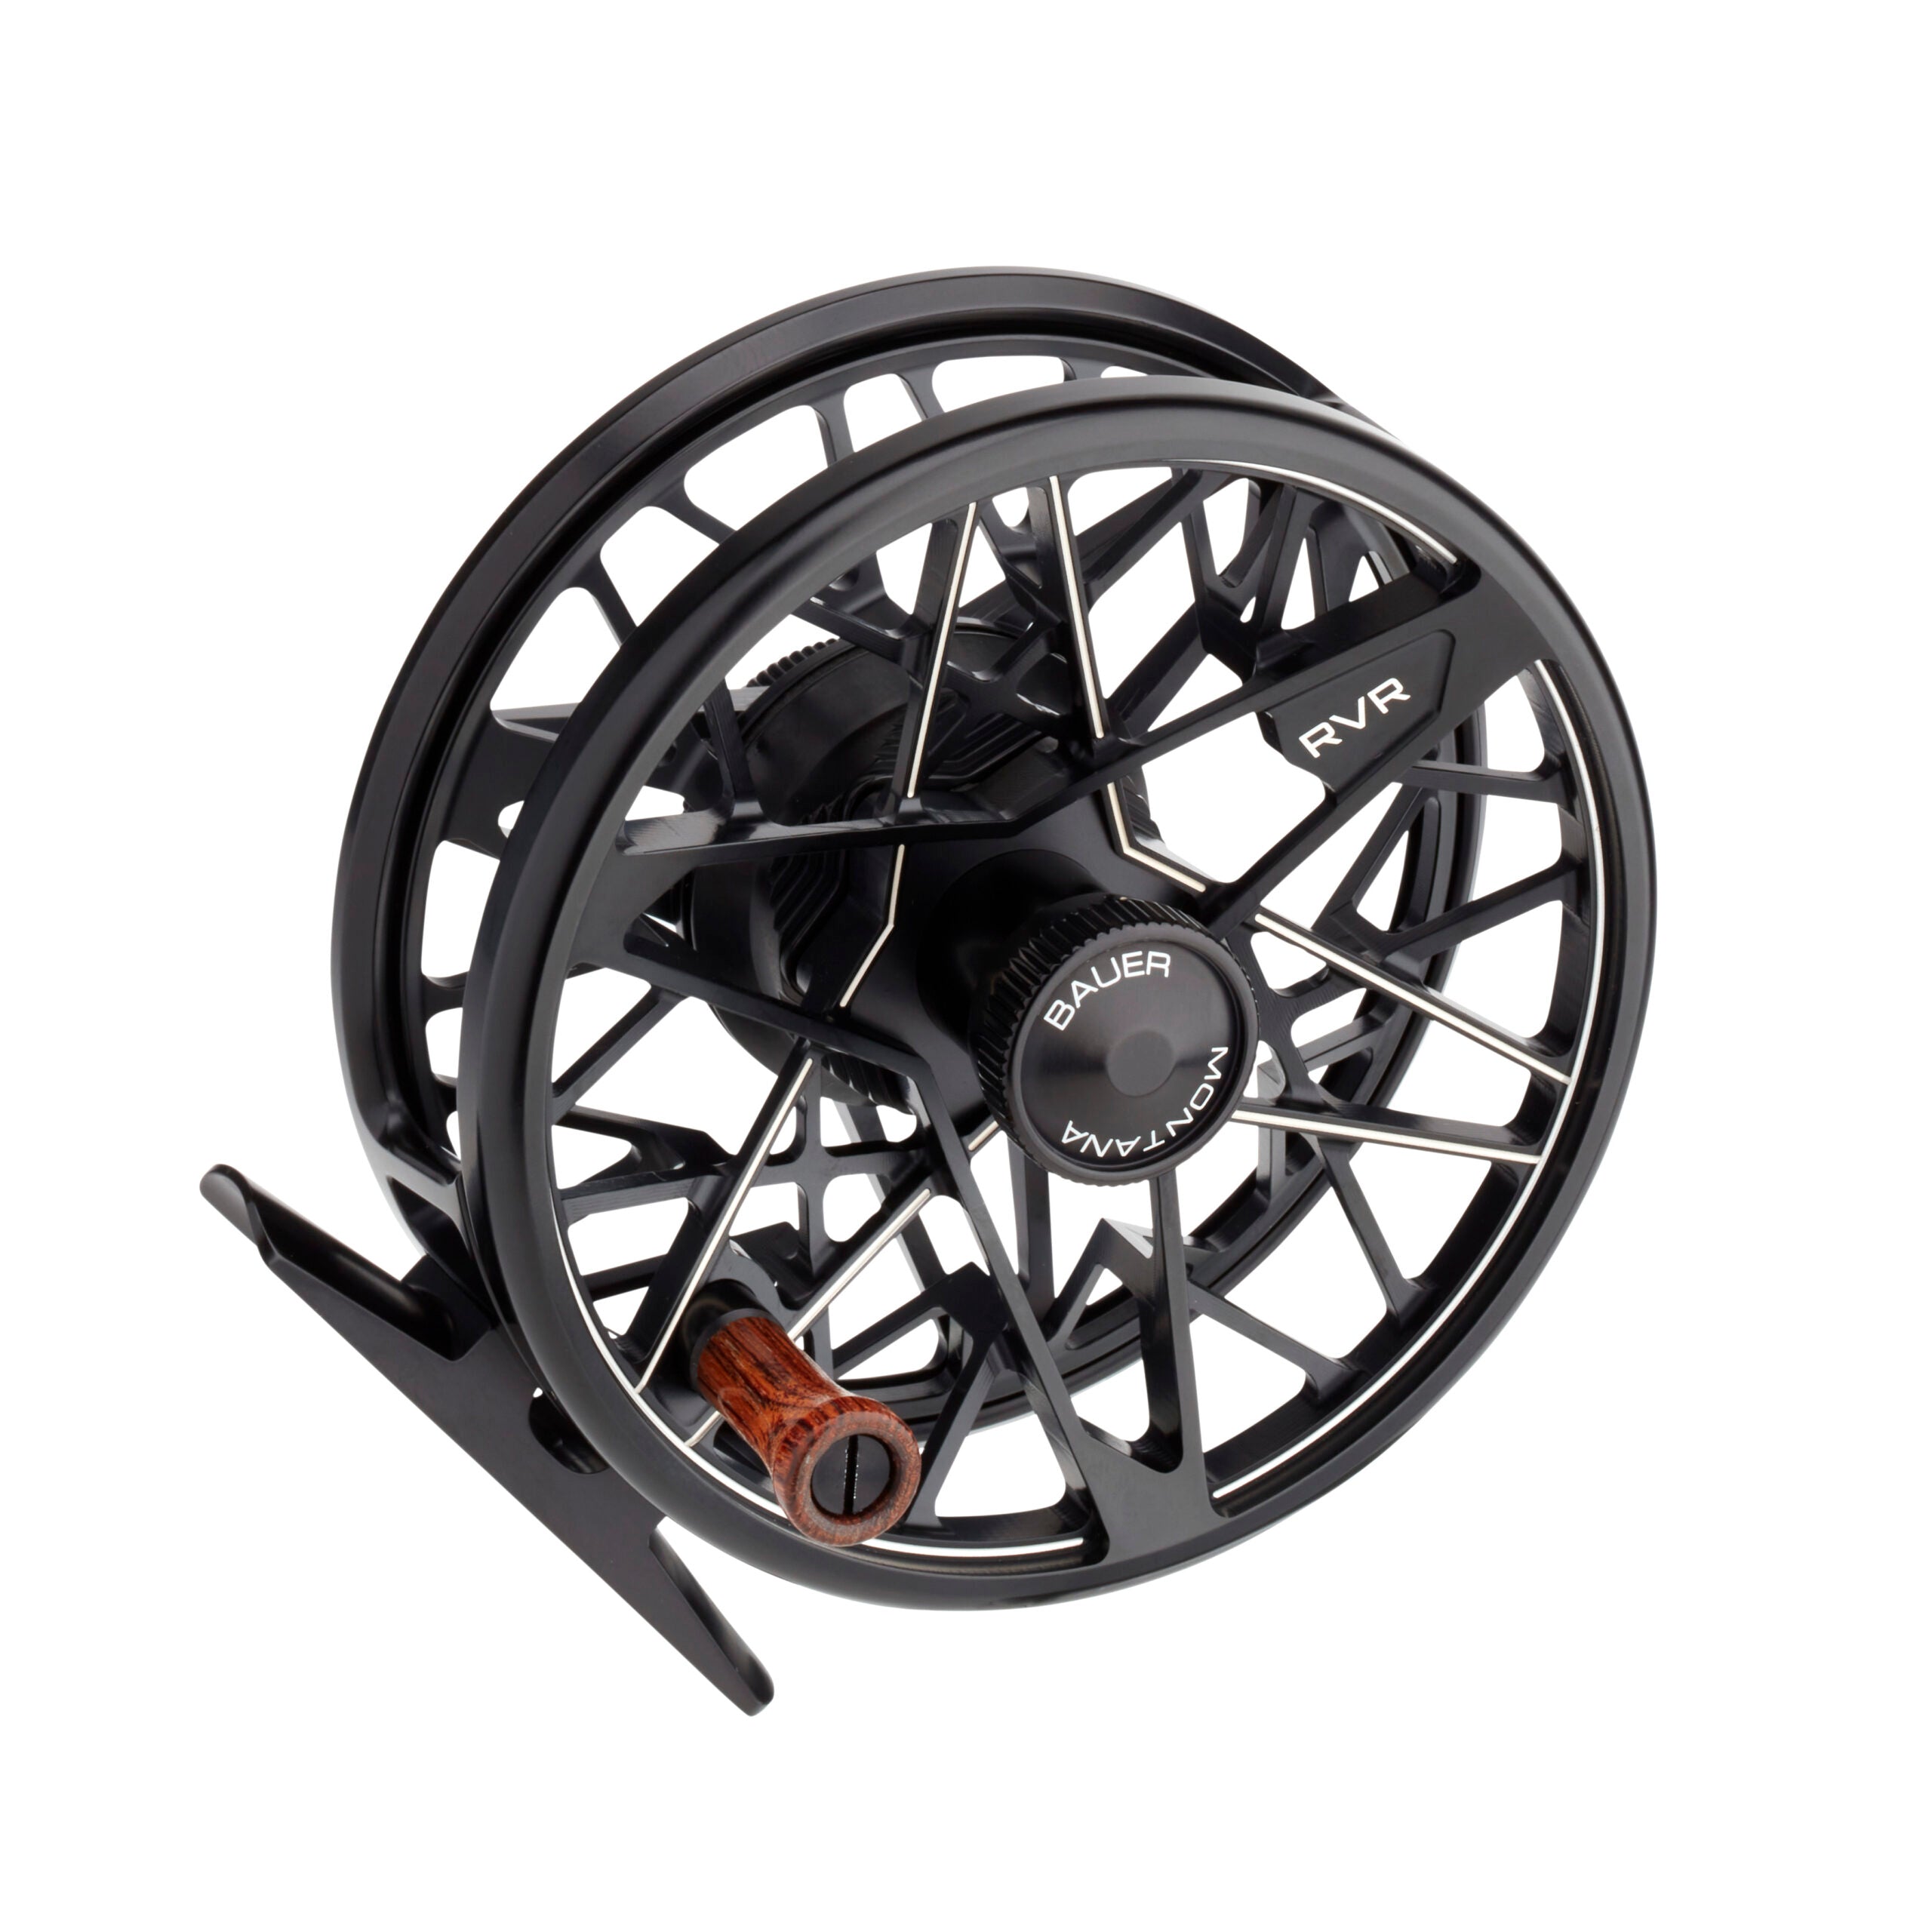 Bauer's RVR 6/7 is back on the shelves - Angling International